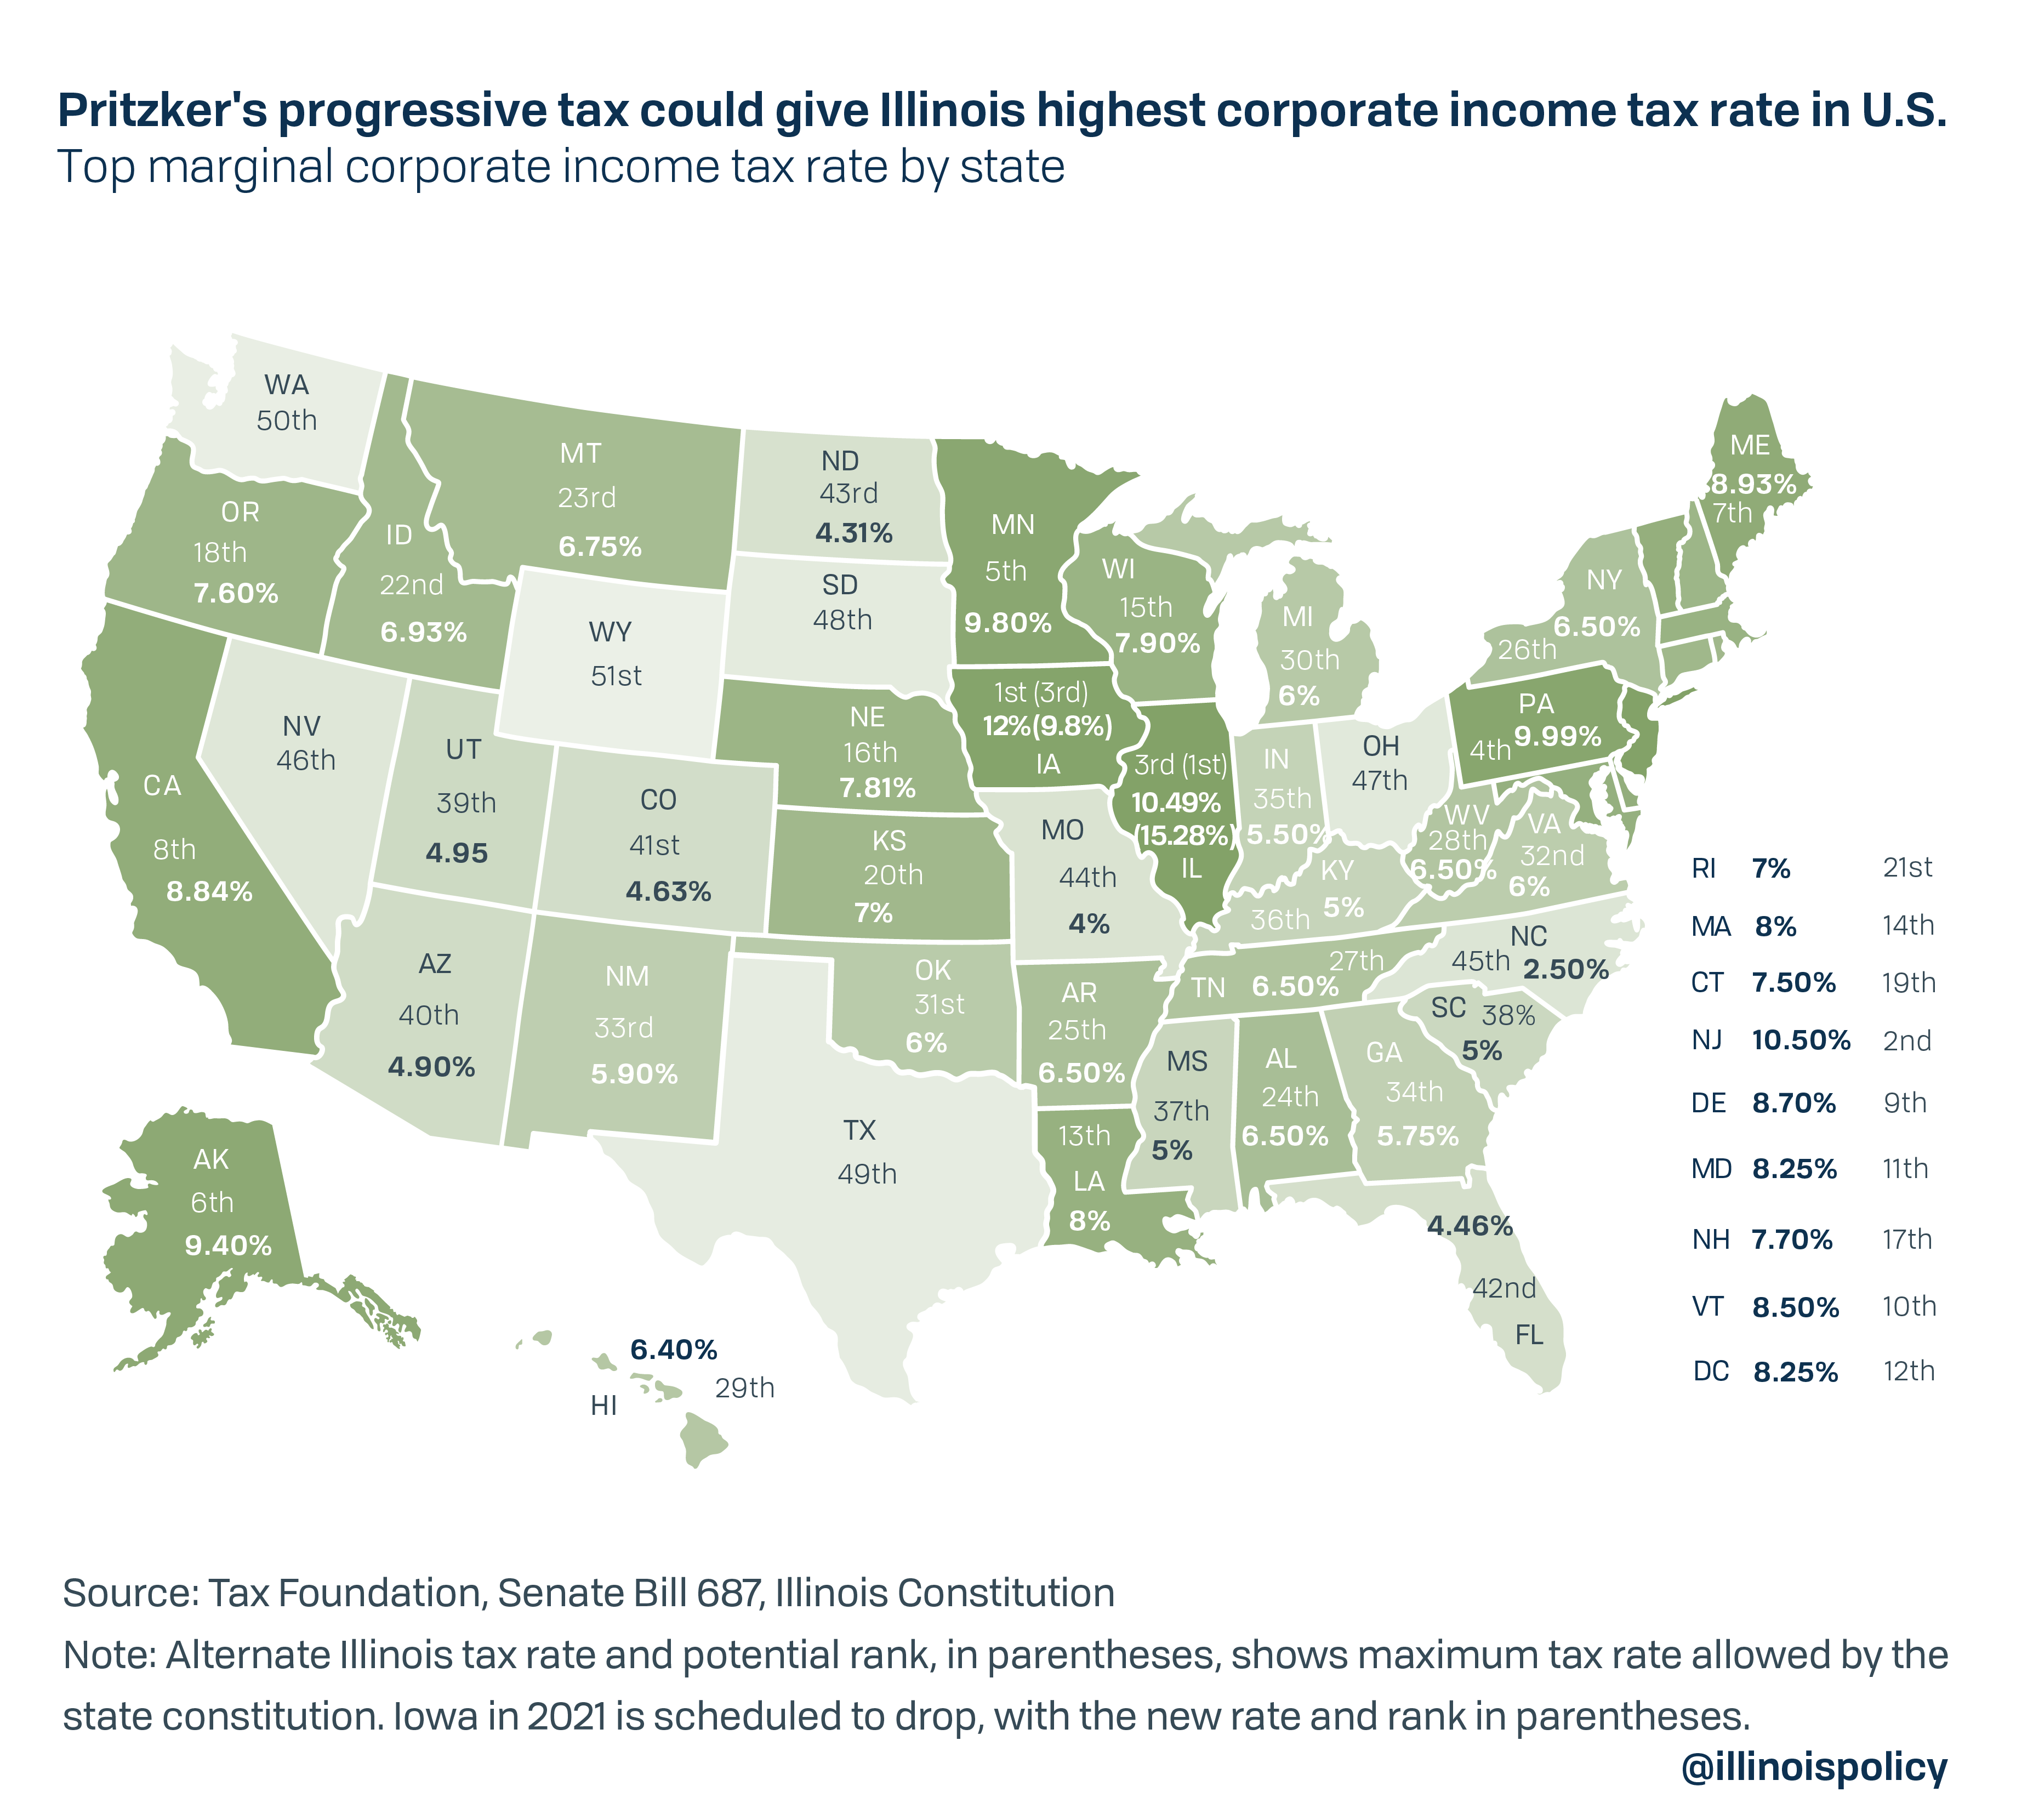 Pritzker's progressive tax could give Illinois highest corporate income tax rate in U.S.